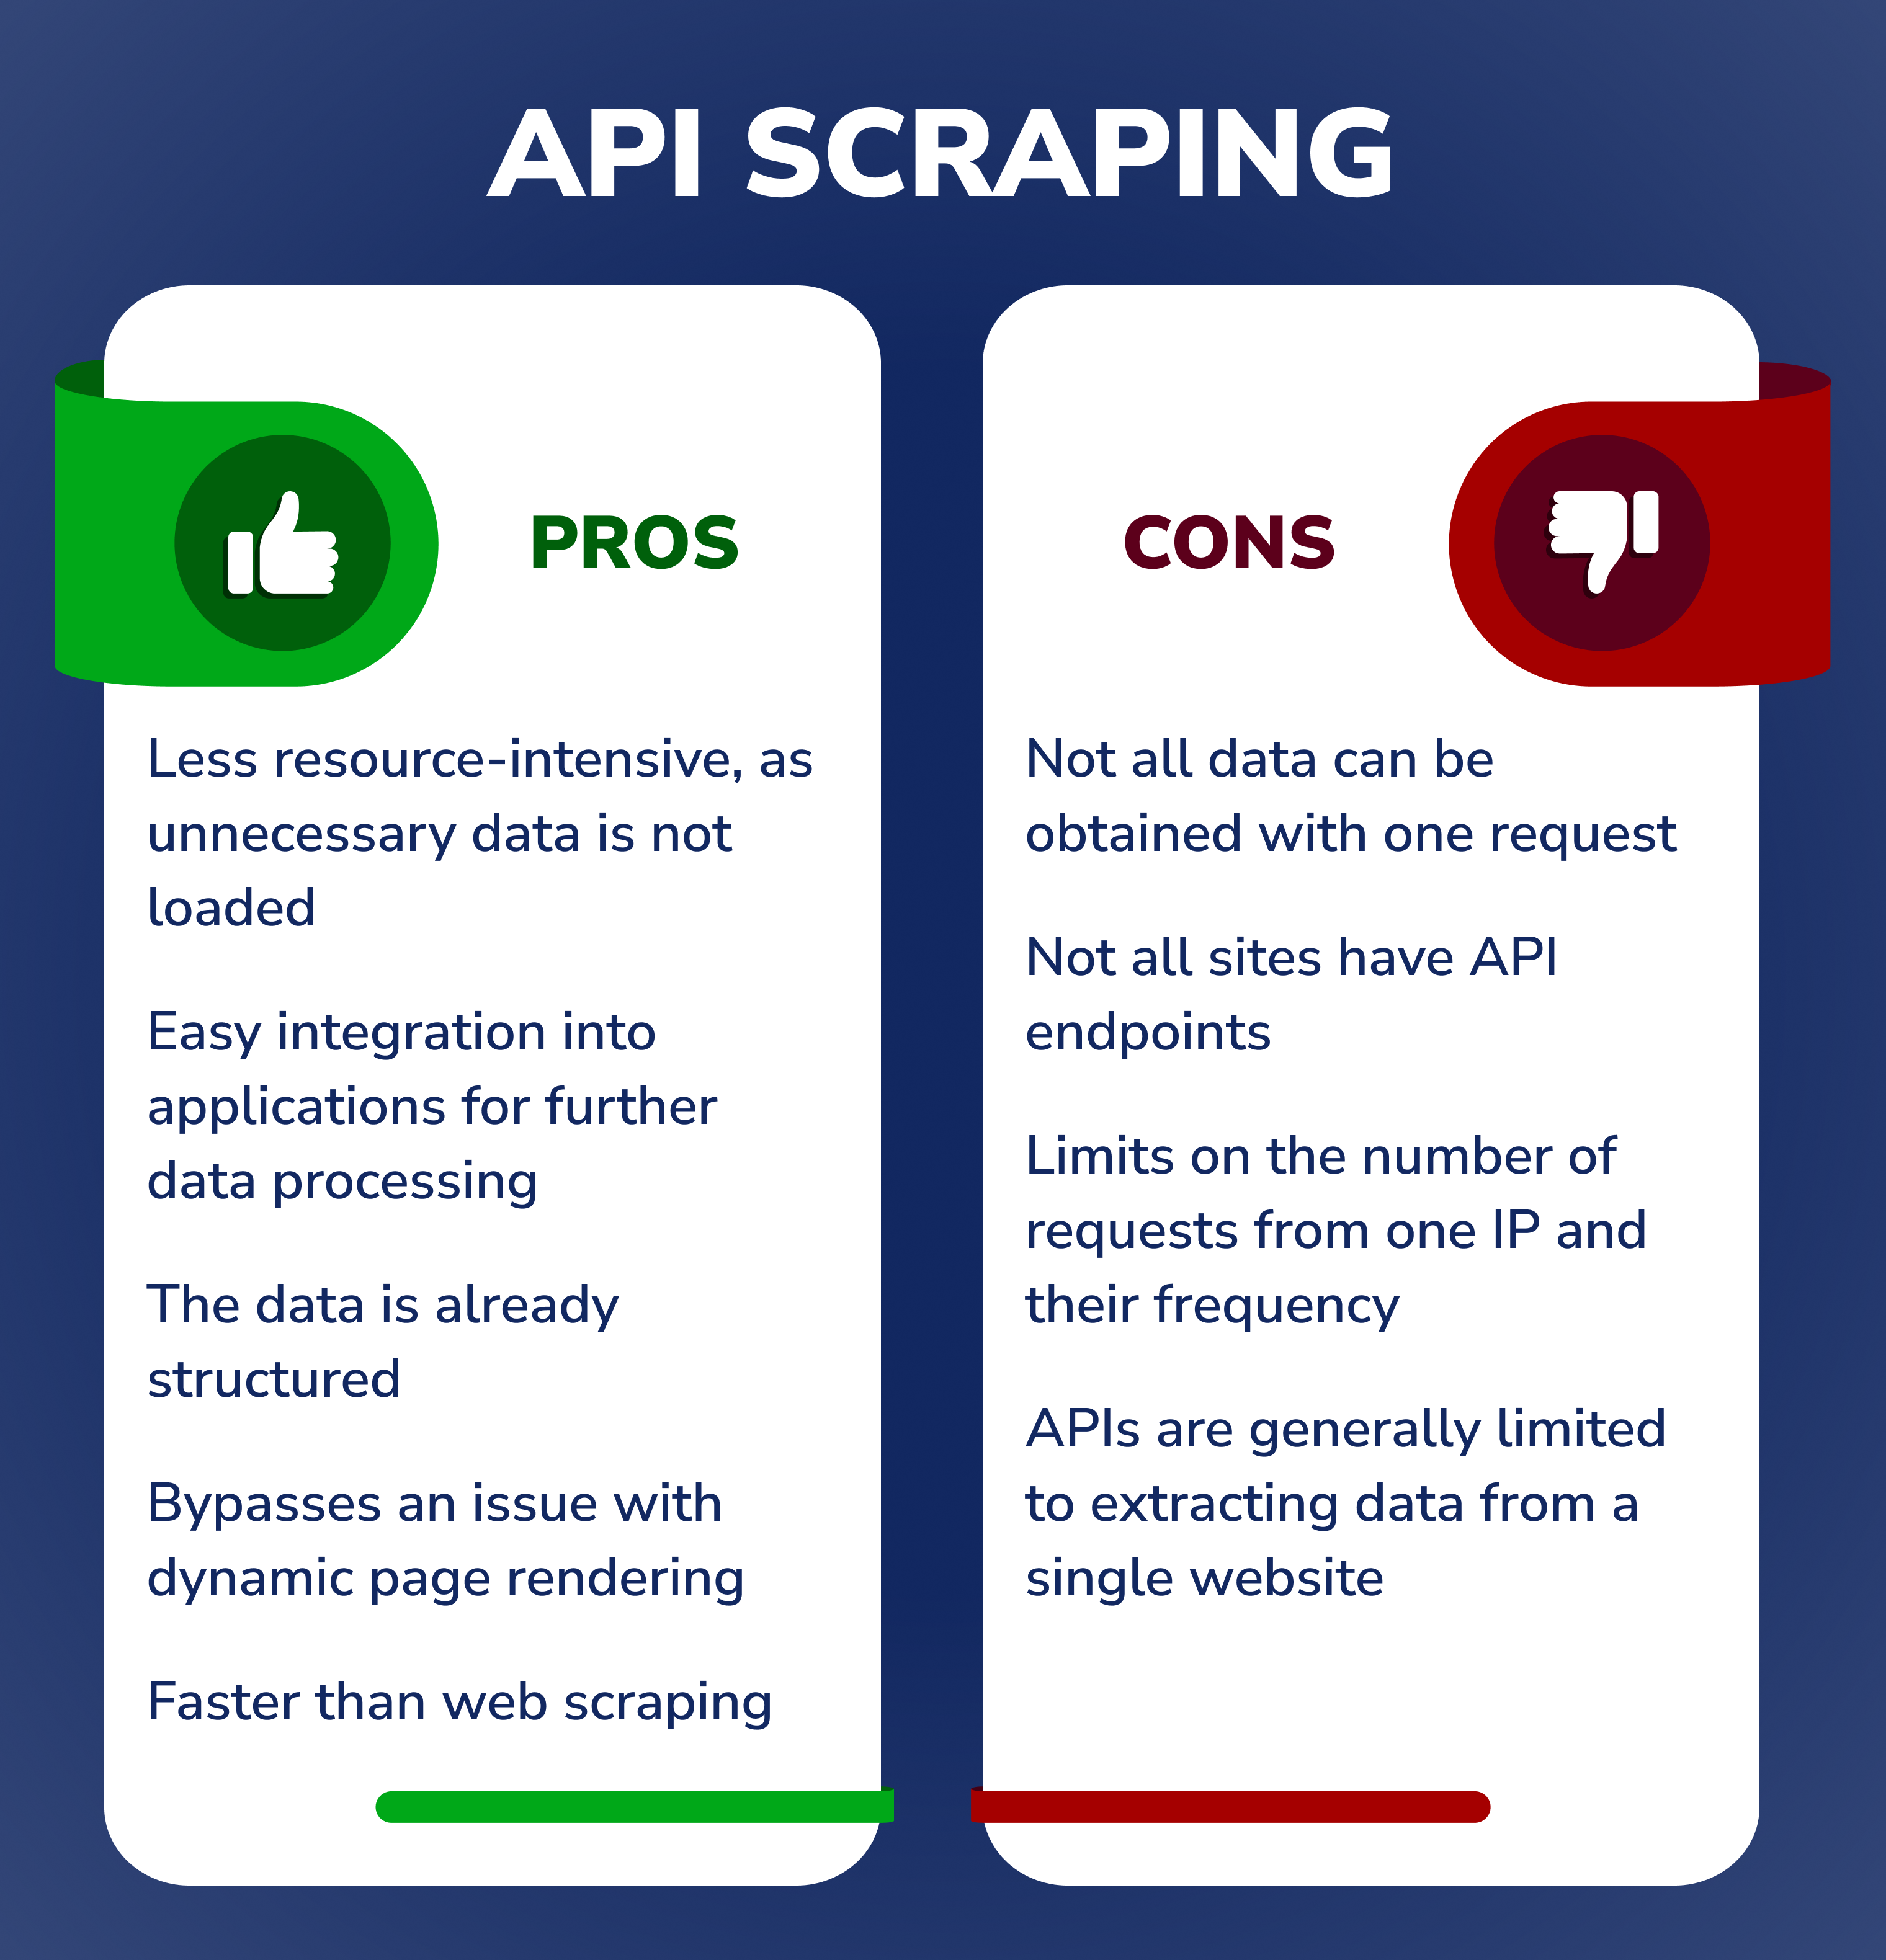 Pros and cons of API scraping